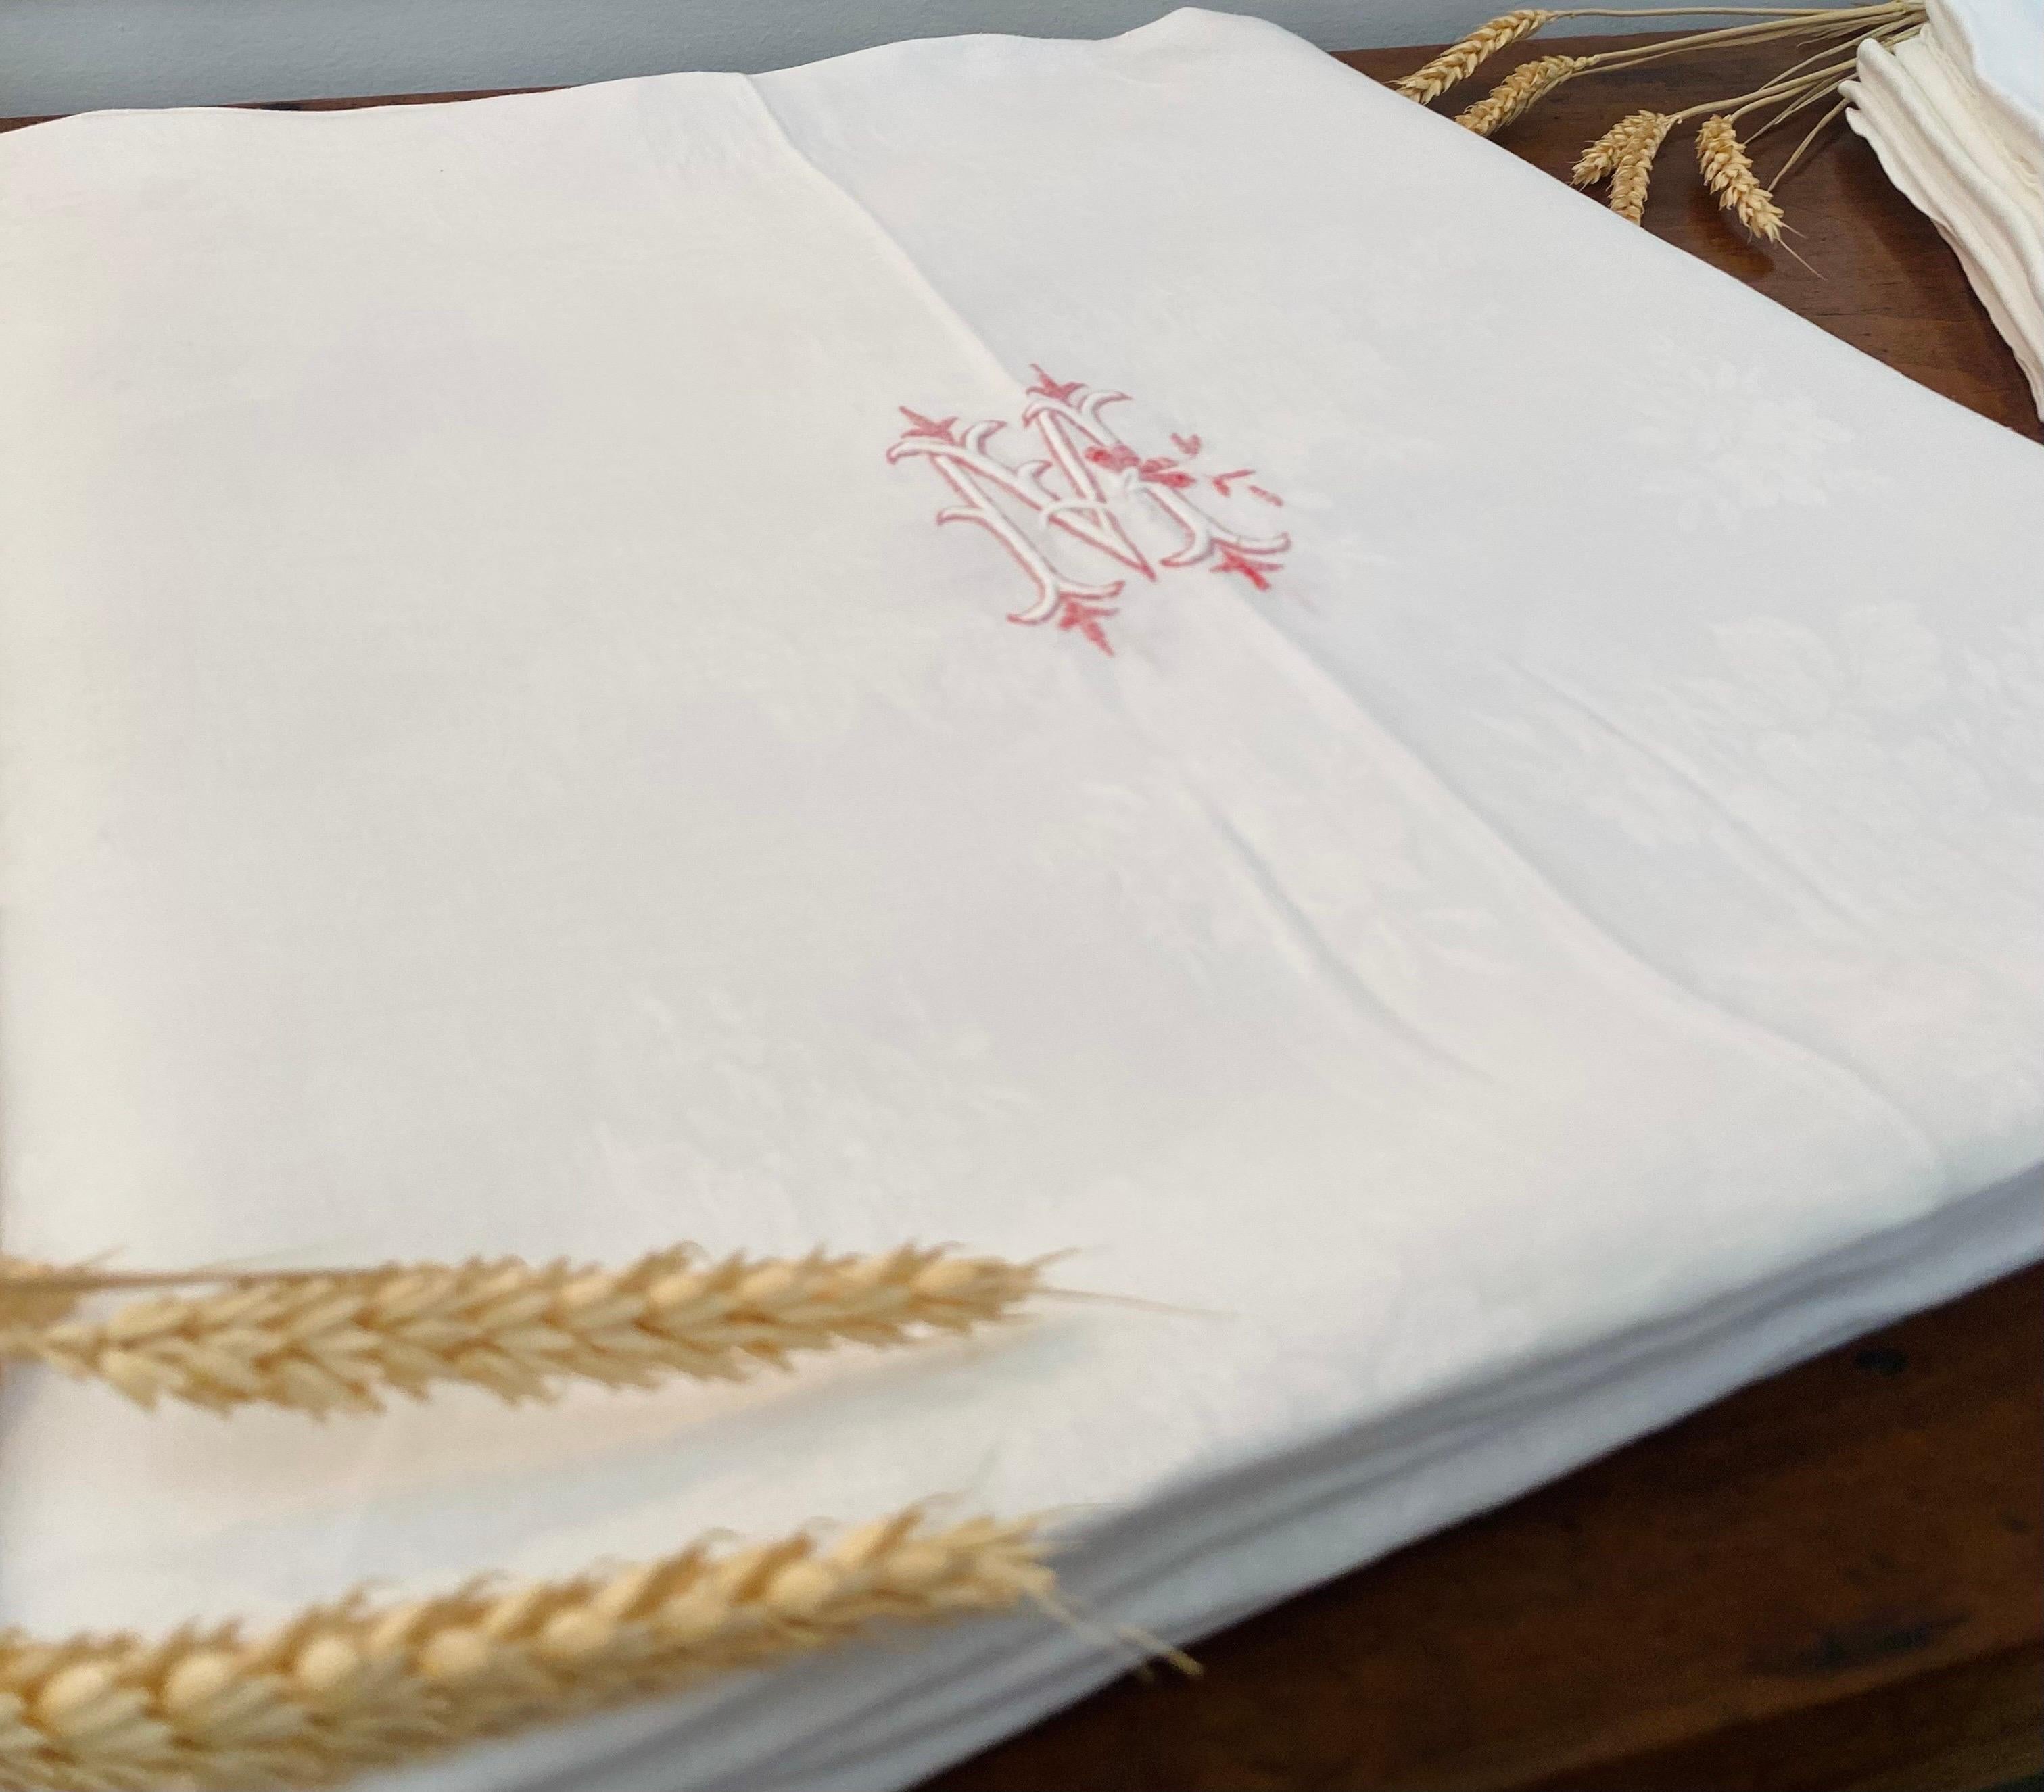 Very beautiful Set of 6 napkins and matching tablecloth in 1900s/1920s damask linen with a single letter in white and red monogram. The embroidery is very delicate.
Damascus is also very beautiful.

Art Nouveau / early Art Deco - French manual